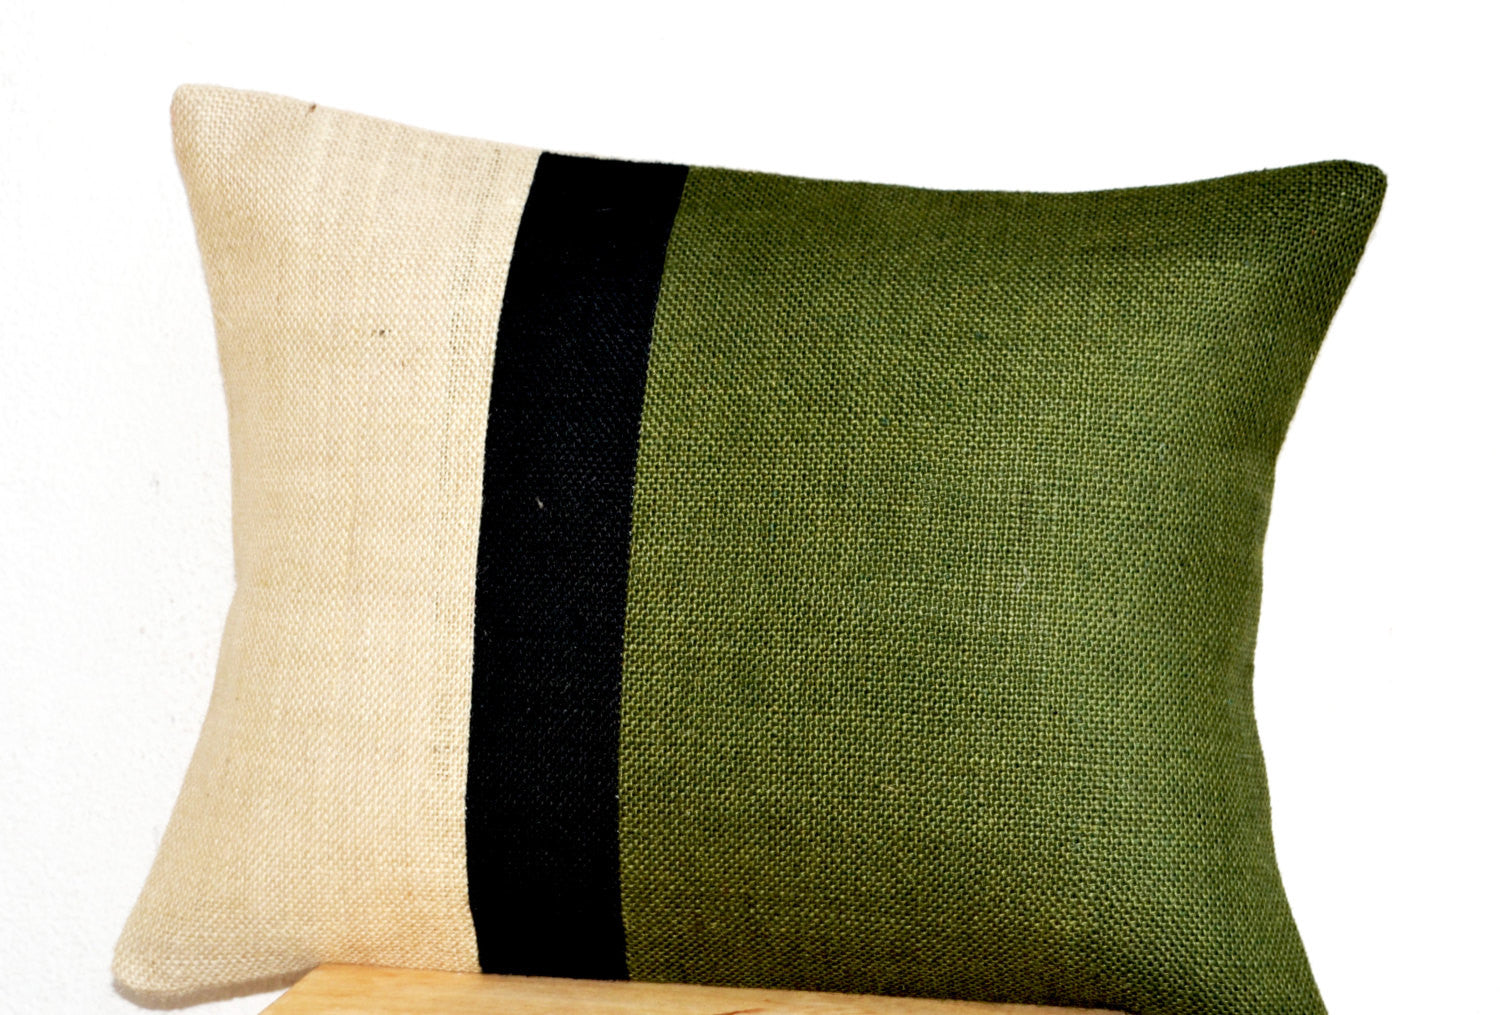 Handmade forest green cushion cover